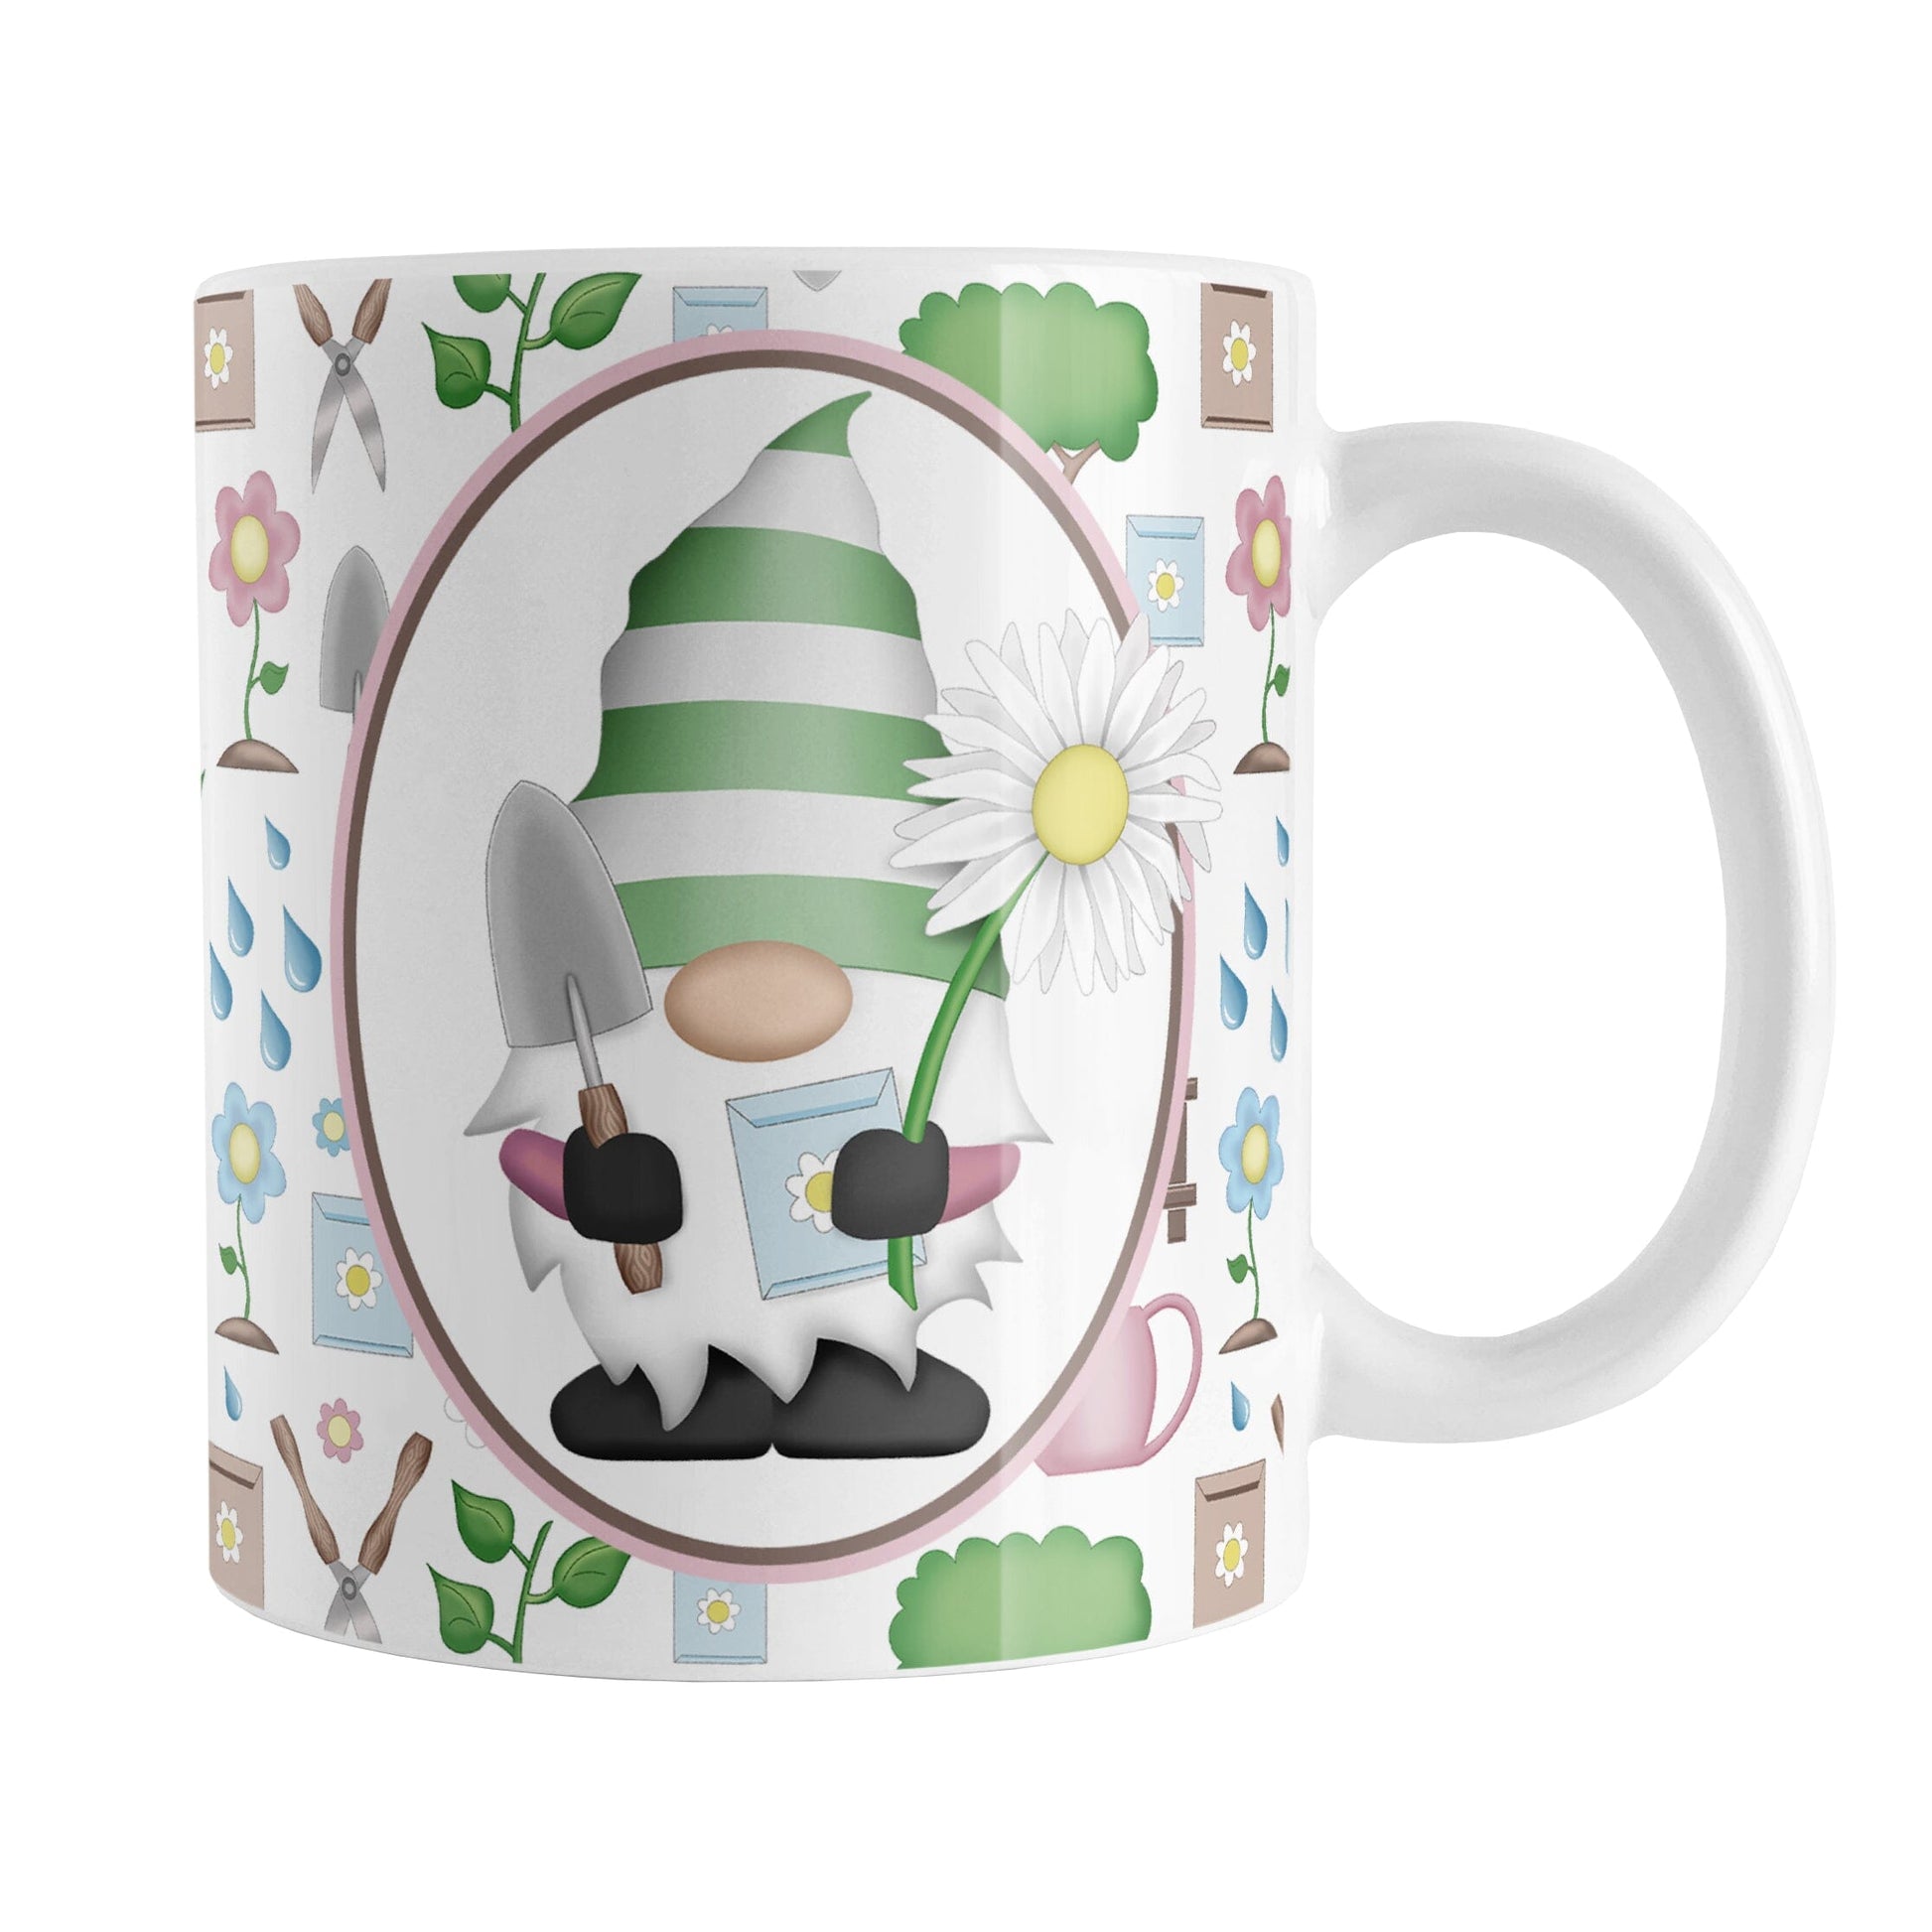 Spring Gnome Gardening Pattern Mug (11oz) at Amy's Coffee Mugs. A ceramic coffee mug designed with an adorable spring gardening gnome holding  an oversized daisy in a white oval over a springtime gardening pattern with trees, plants, flowers, seed packets, watering cans, fences, and gardening tools in spring colors such as pink, blue, green, and brown. 